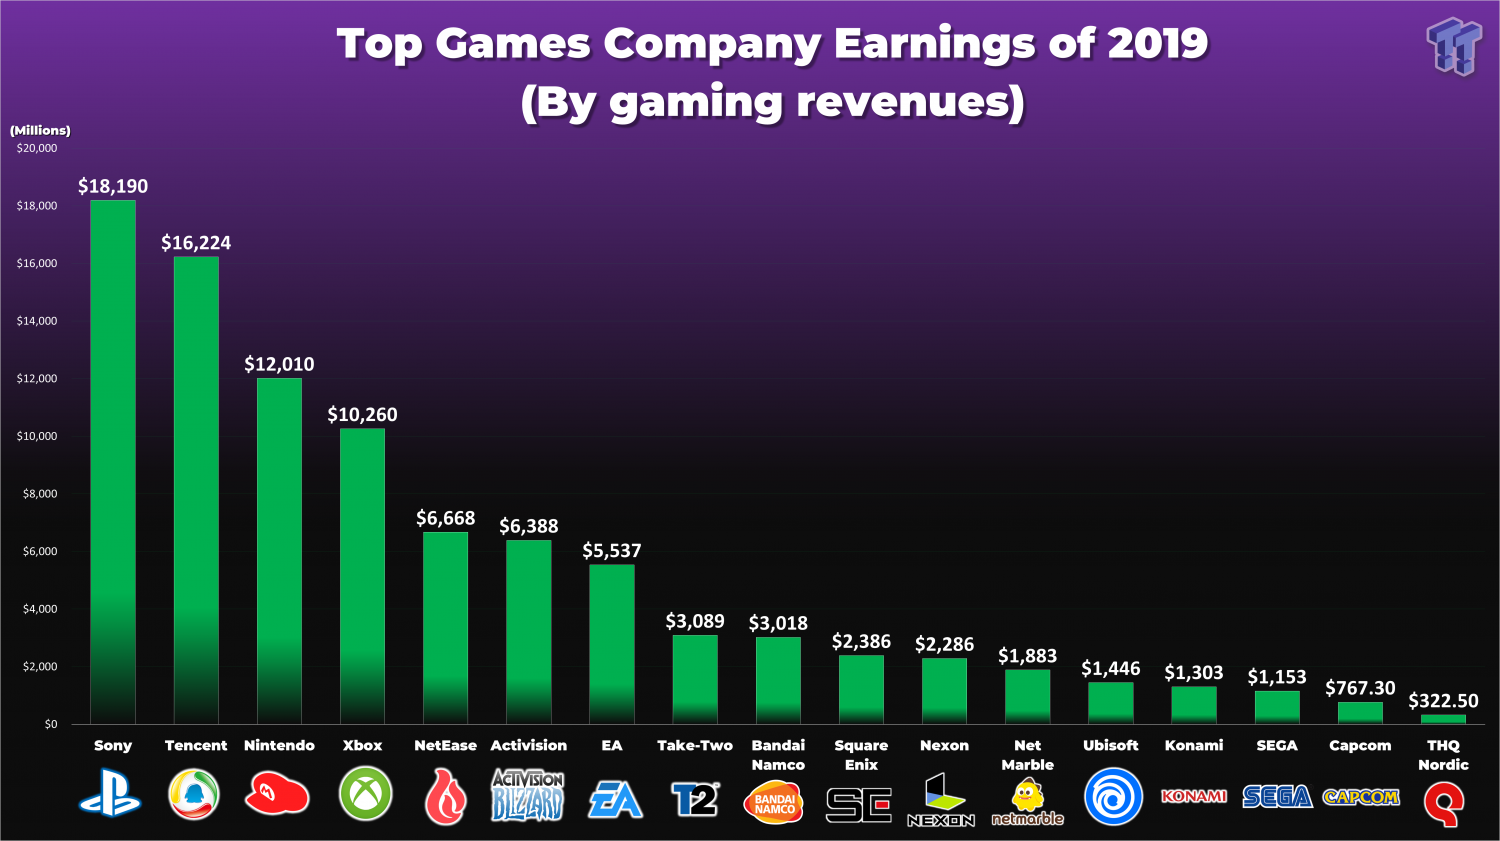 72703_34_2019s-top-earning-video-game-companies-sony-conquers-the-charts_full.png